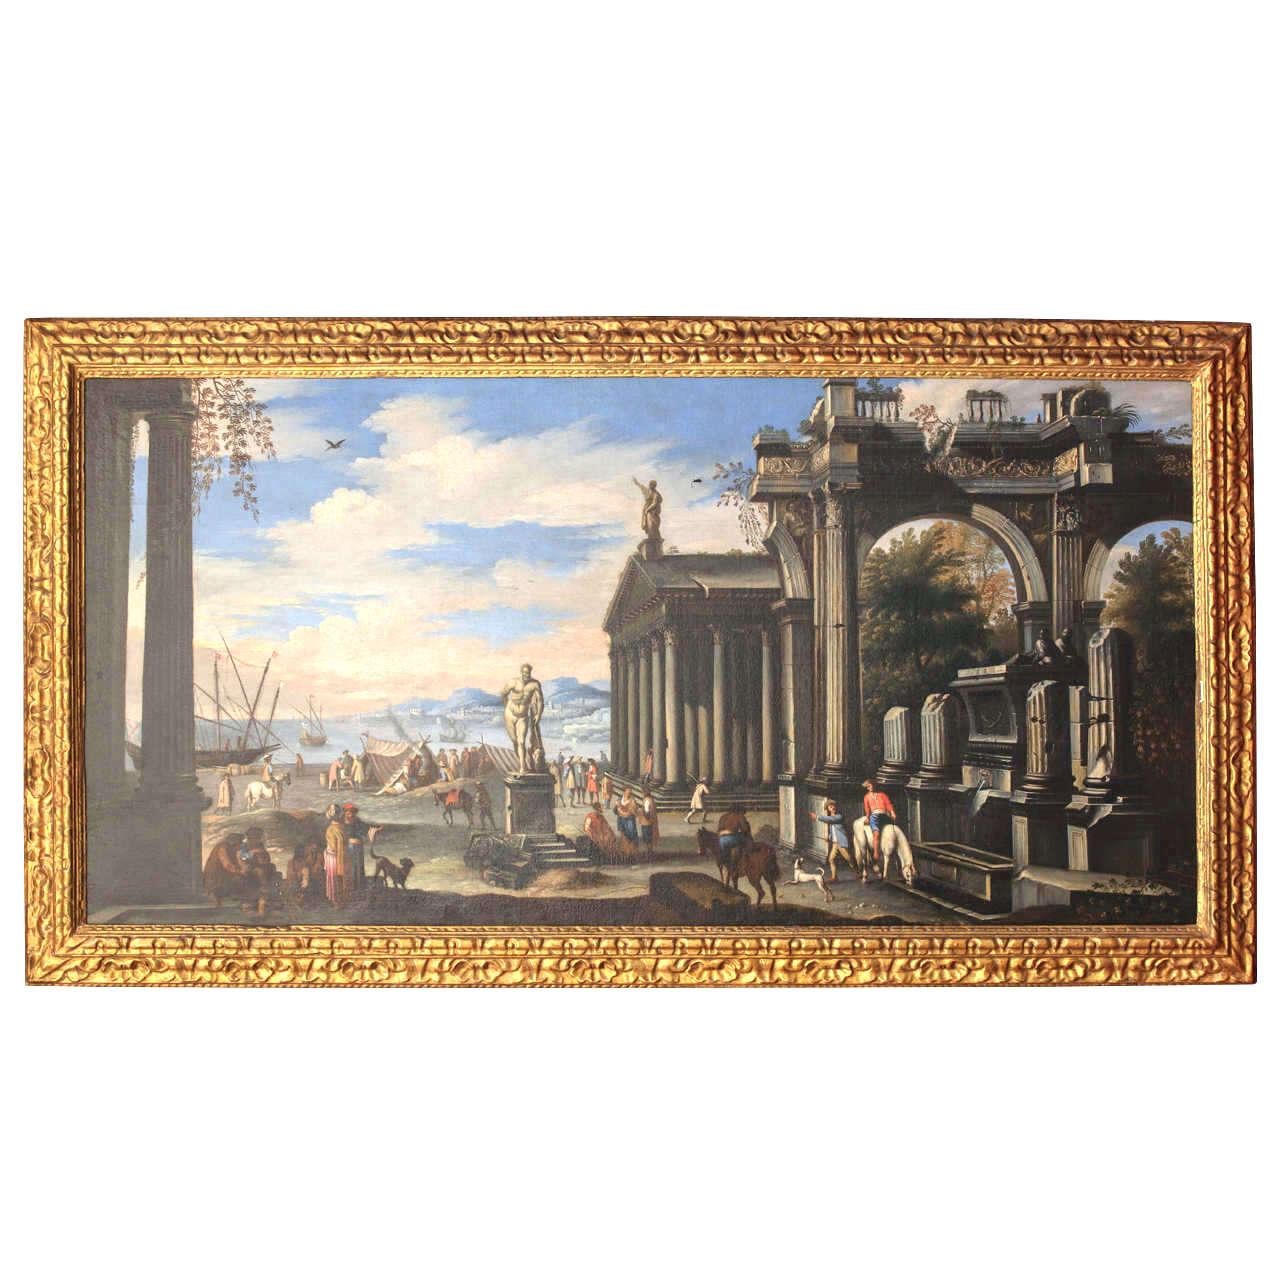 Giovanni Ghisolfi Landscape Painting - Capriccio - 17th Century Oil on Canvas Classical Architectural Ruins Painting 